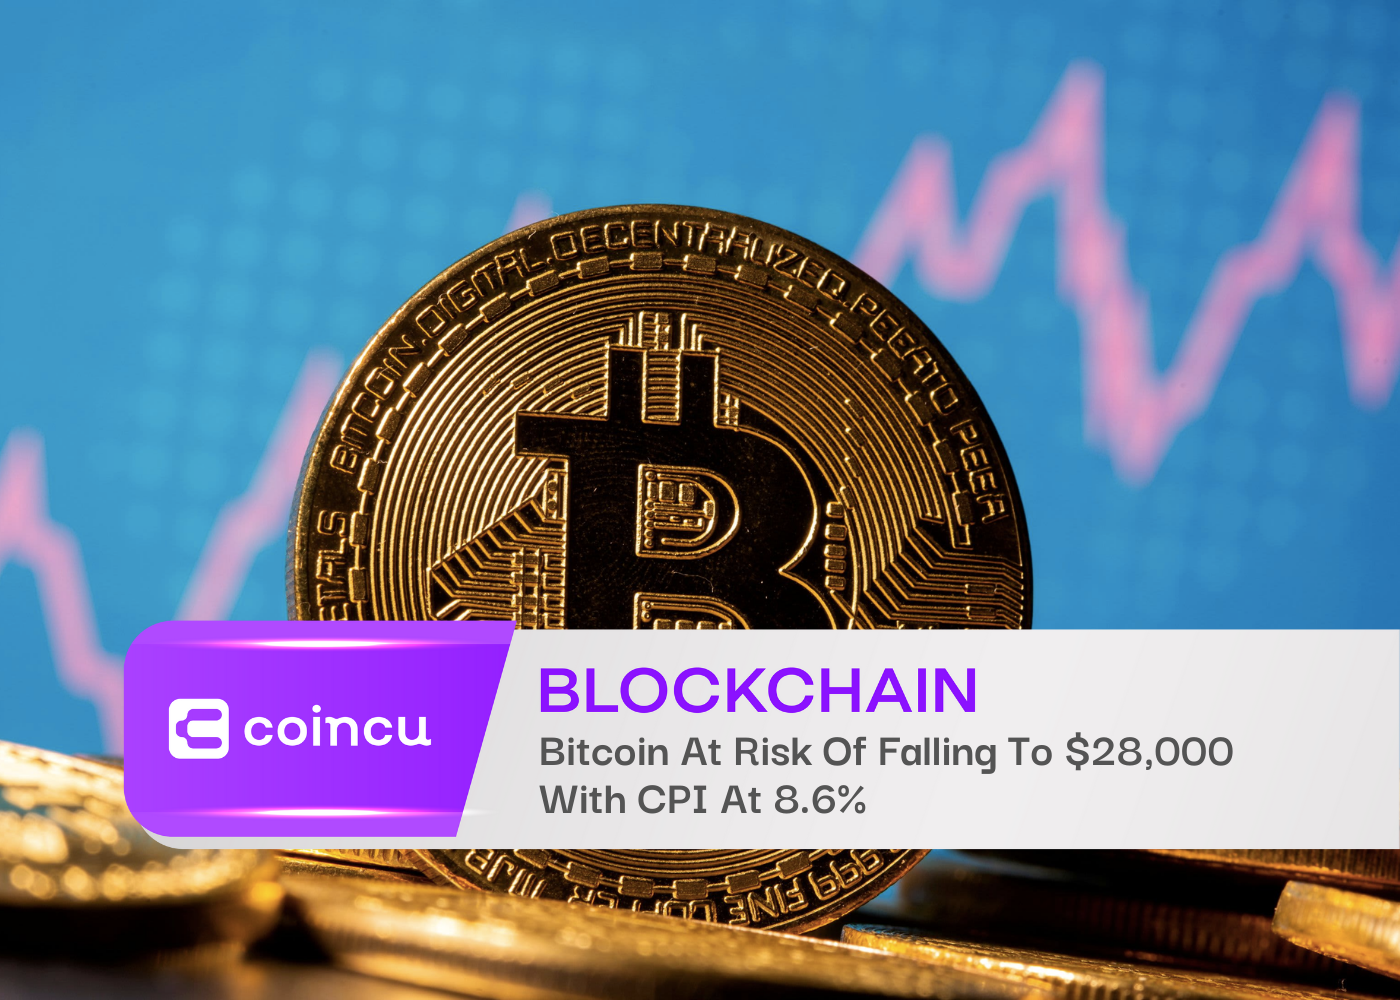 Bitcoin At Risk Of Falling To $28,000 With CPI At 8.6%